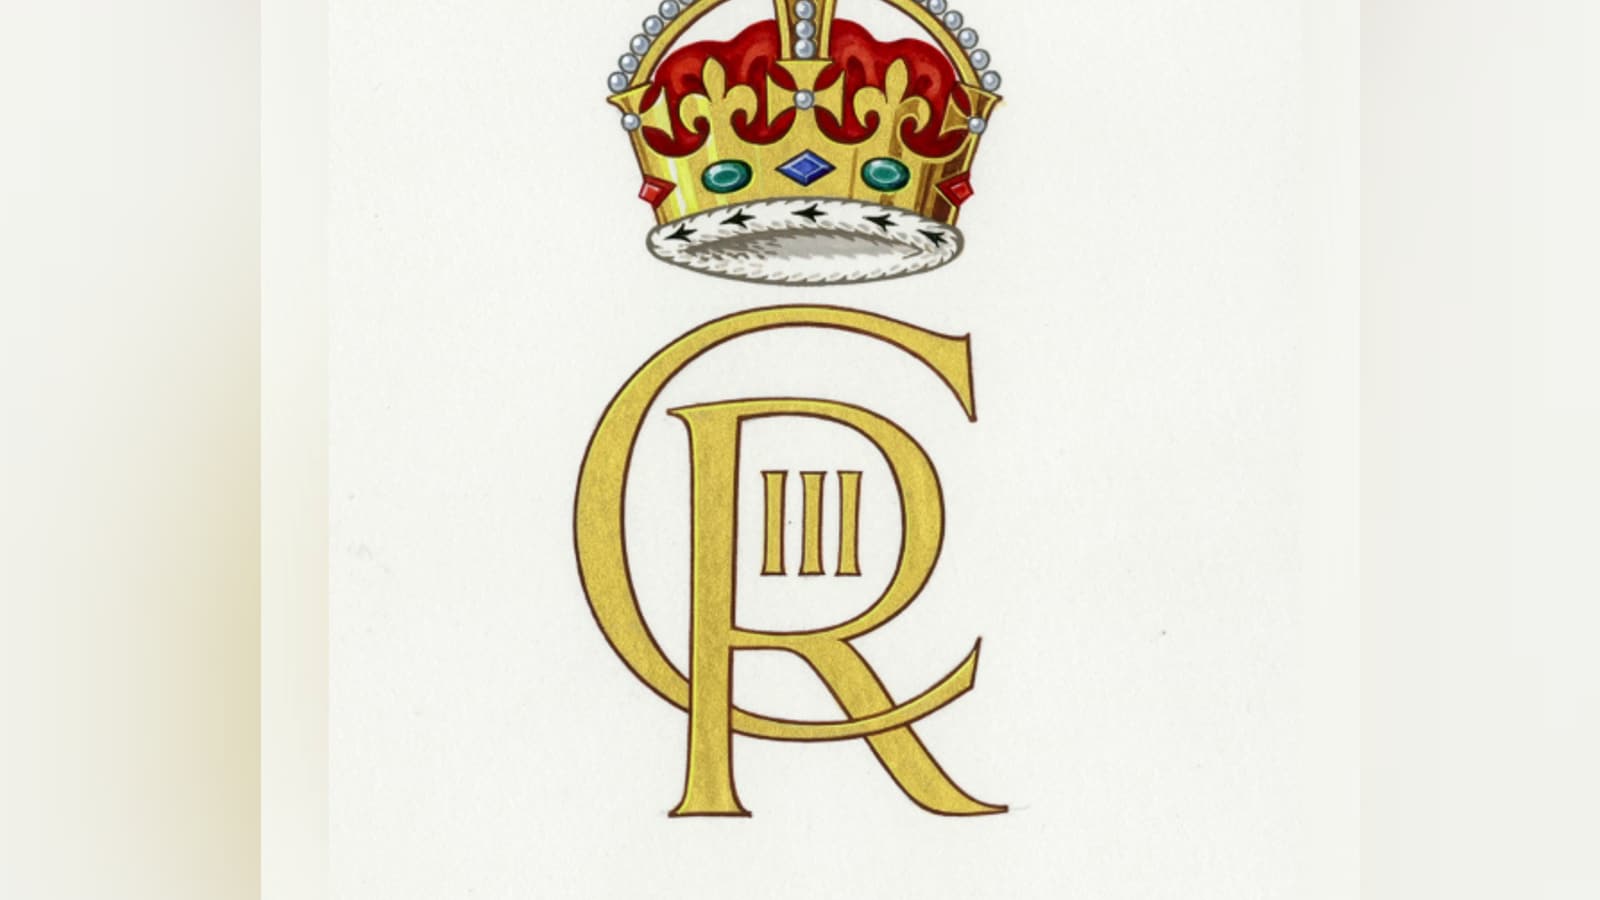 CIIIR King Charles III’s New Royal Cypher Revealed, to Be Featured on